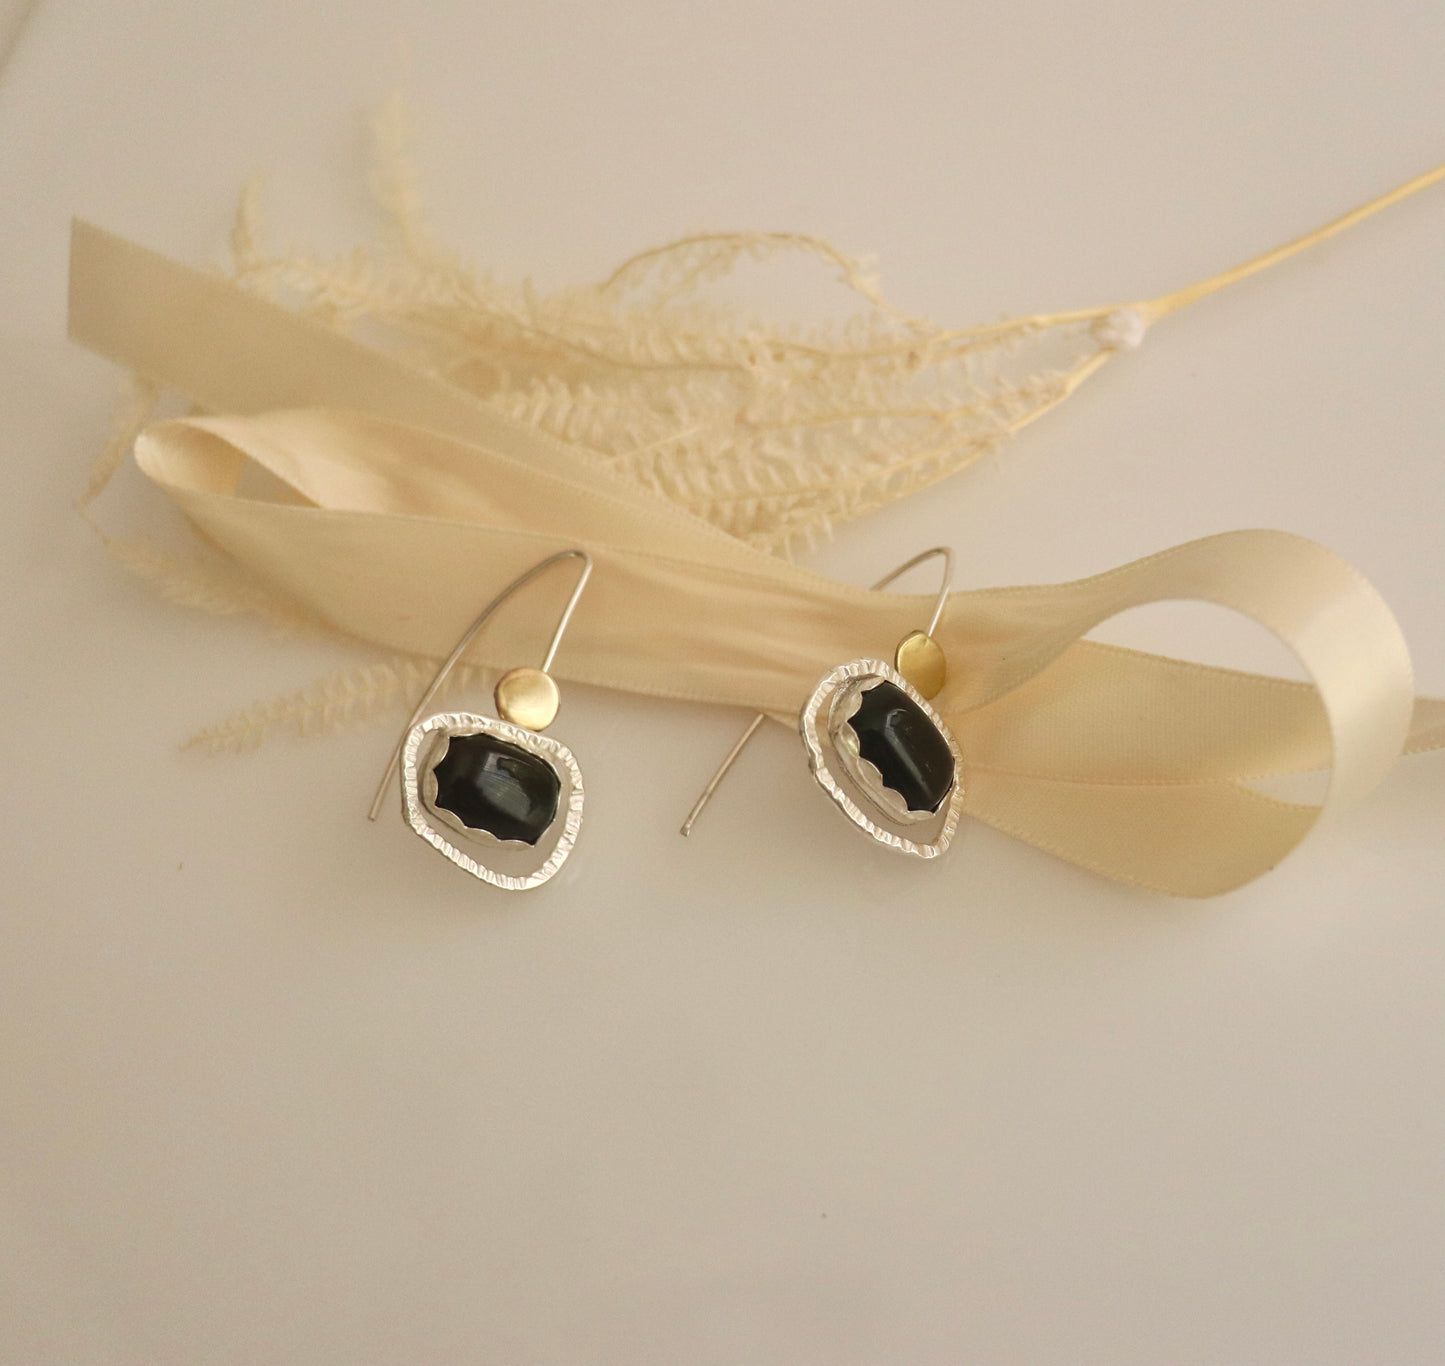 Brass and sterling silver black onyx earrings